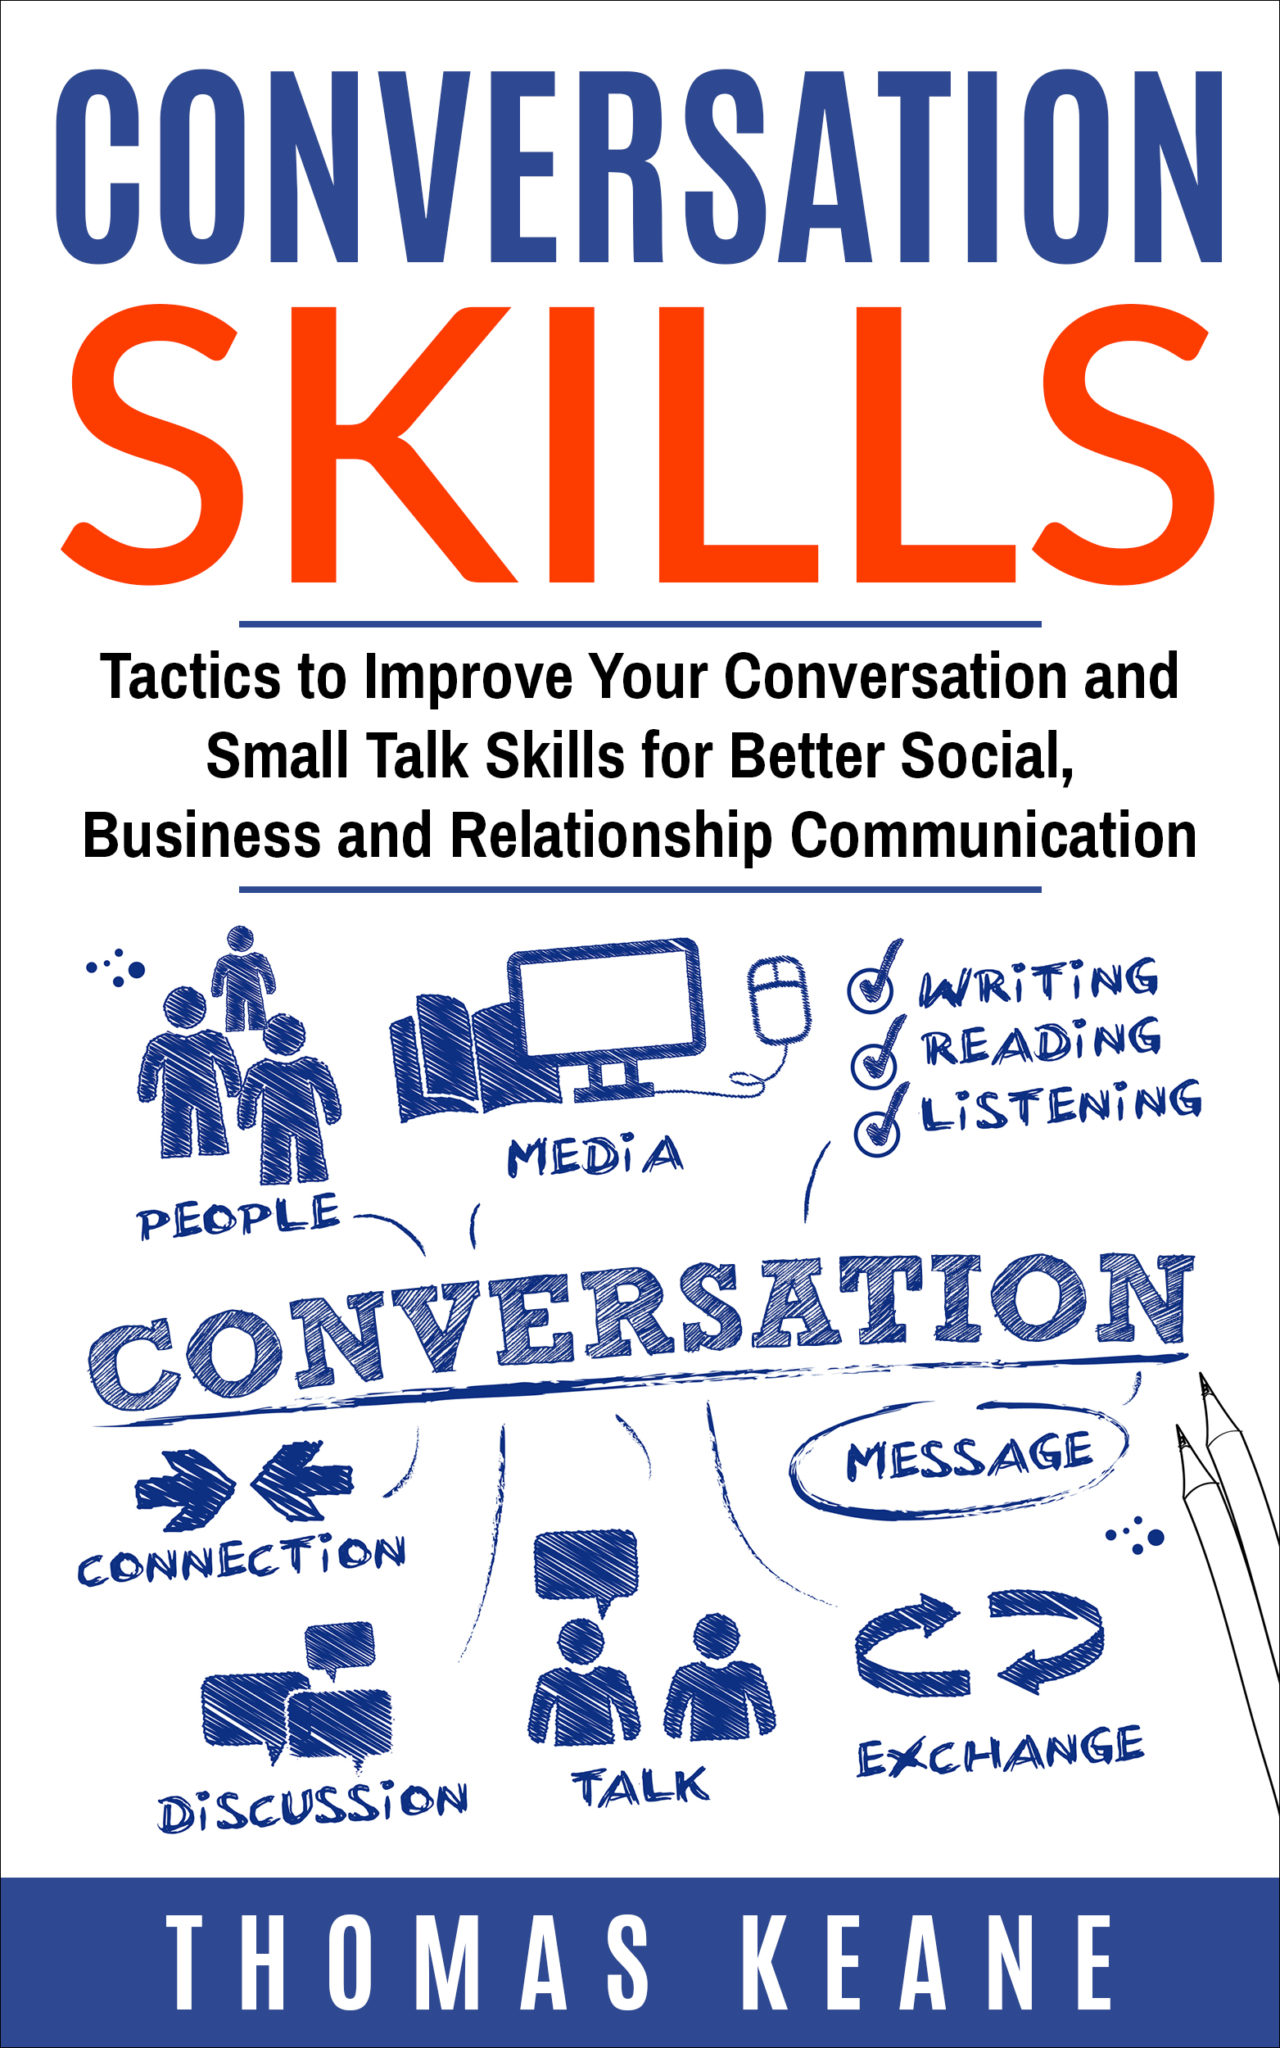 FREE: Conversation Skills: Tactics to Improve Your Conversation and Small Talk Skills for Better Social, Business and Relationship Communication by Thomas Keane